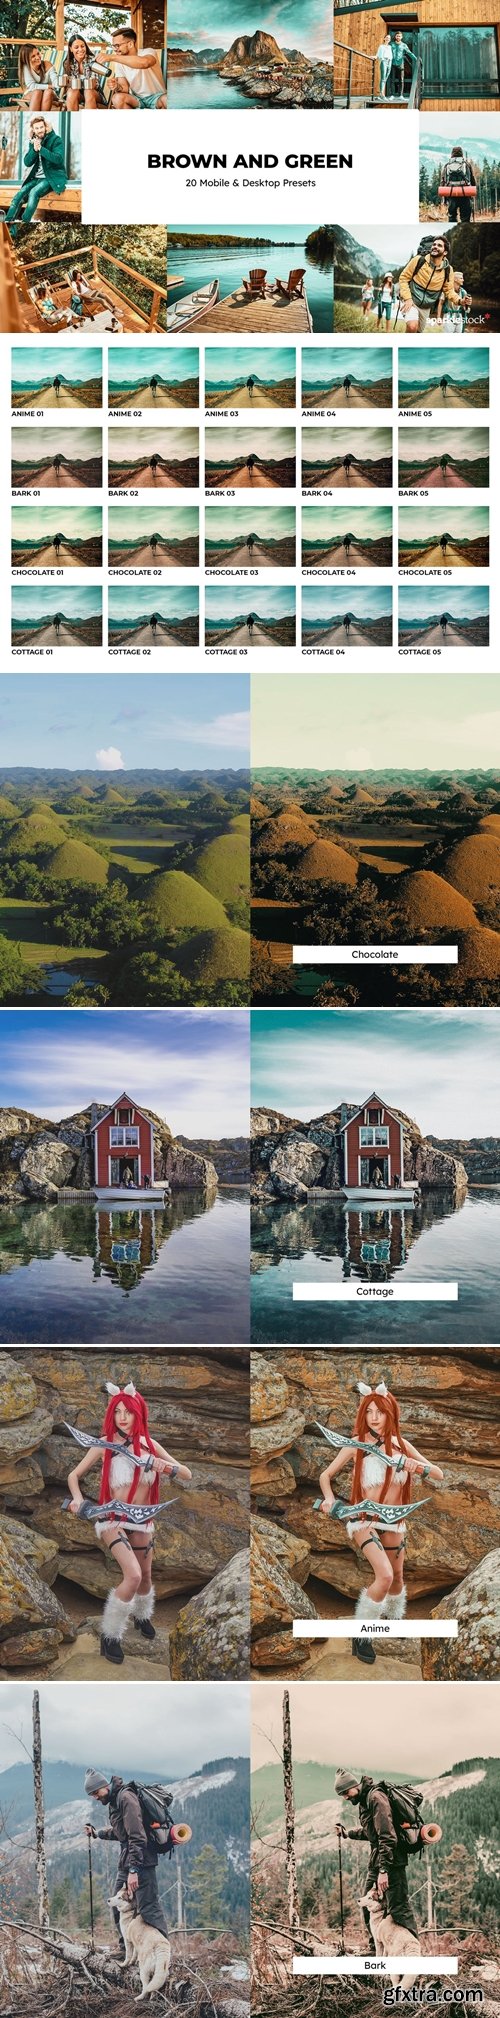 20 Brown and Green Lightroom Presets and LUTs